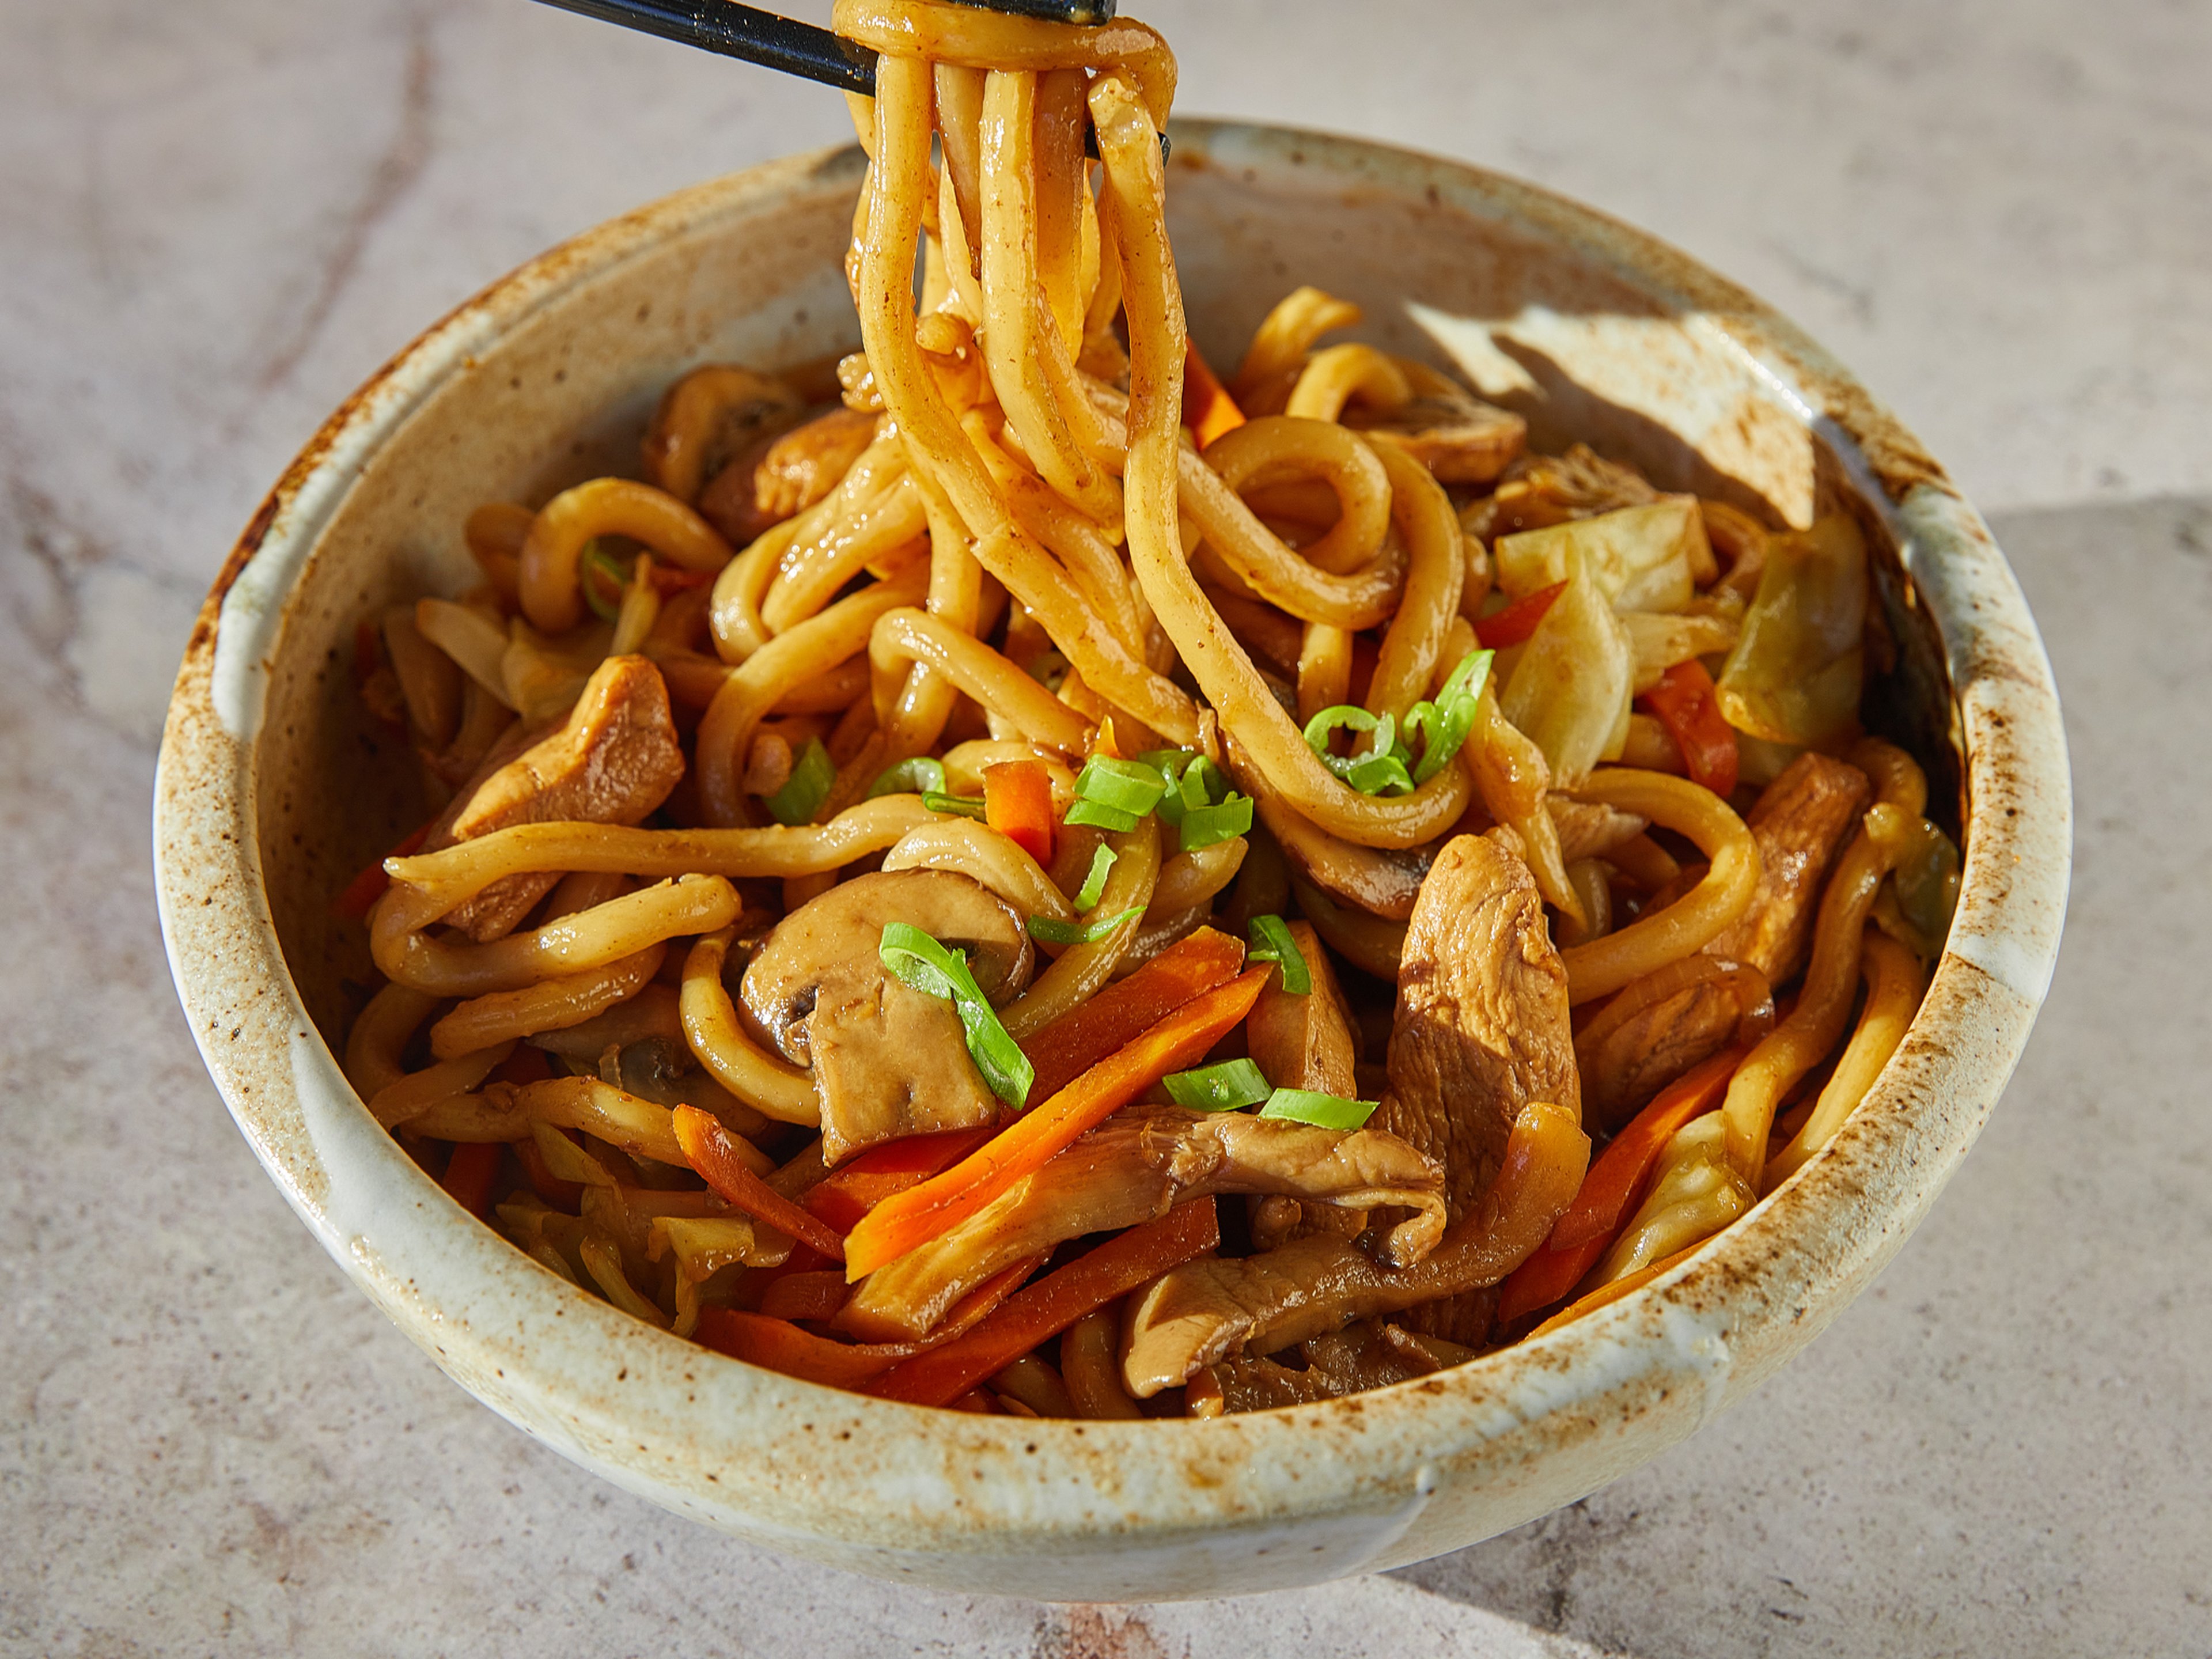 Yaki udon (Japanese stir-fried udon noodles with chicken and vegetables)